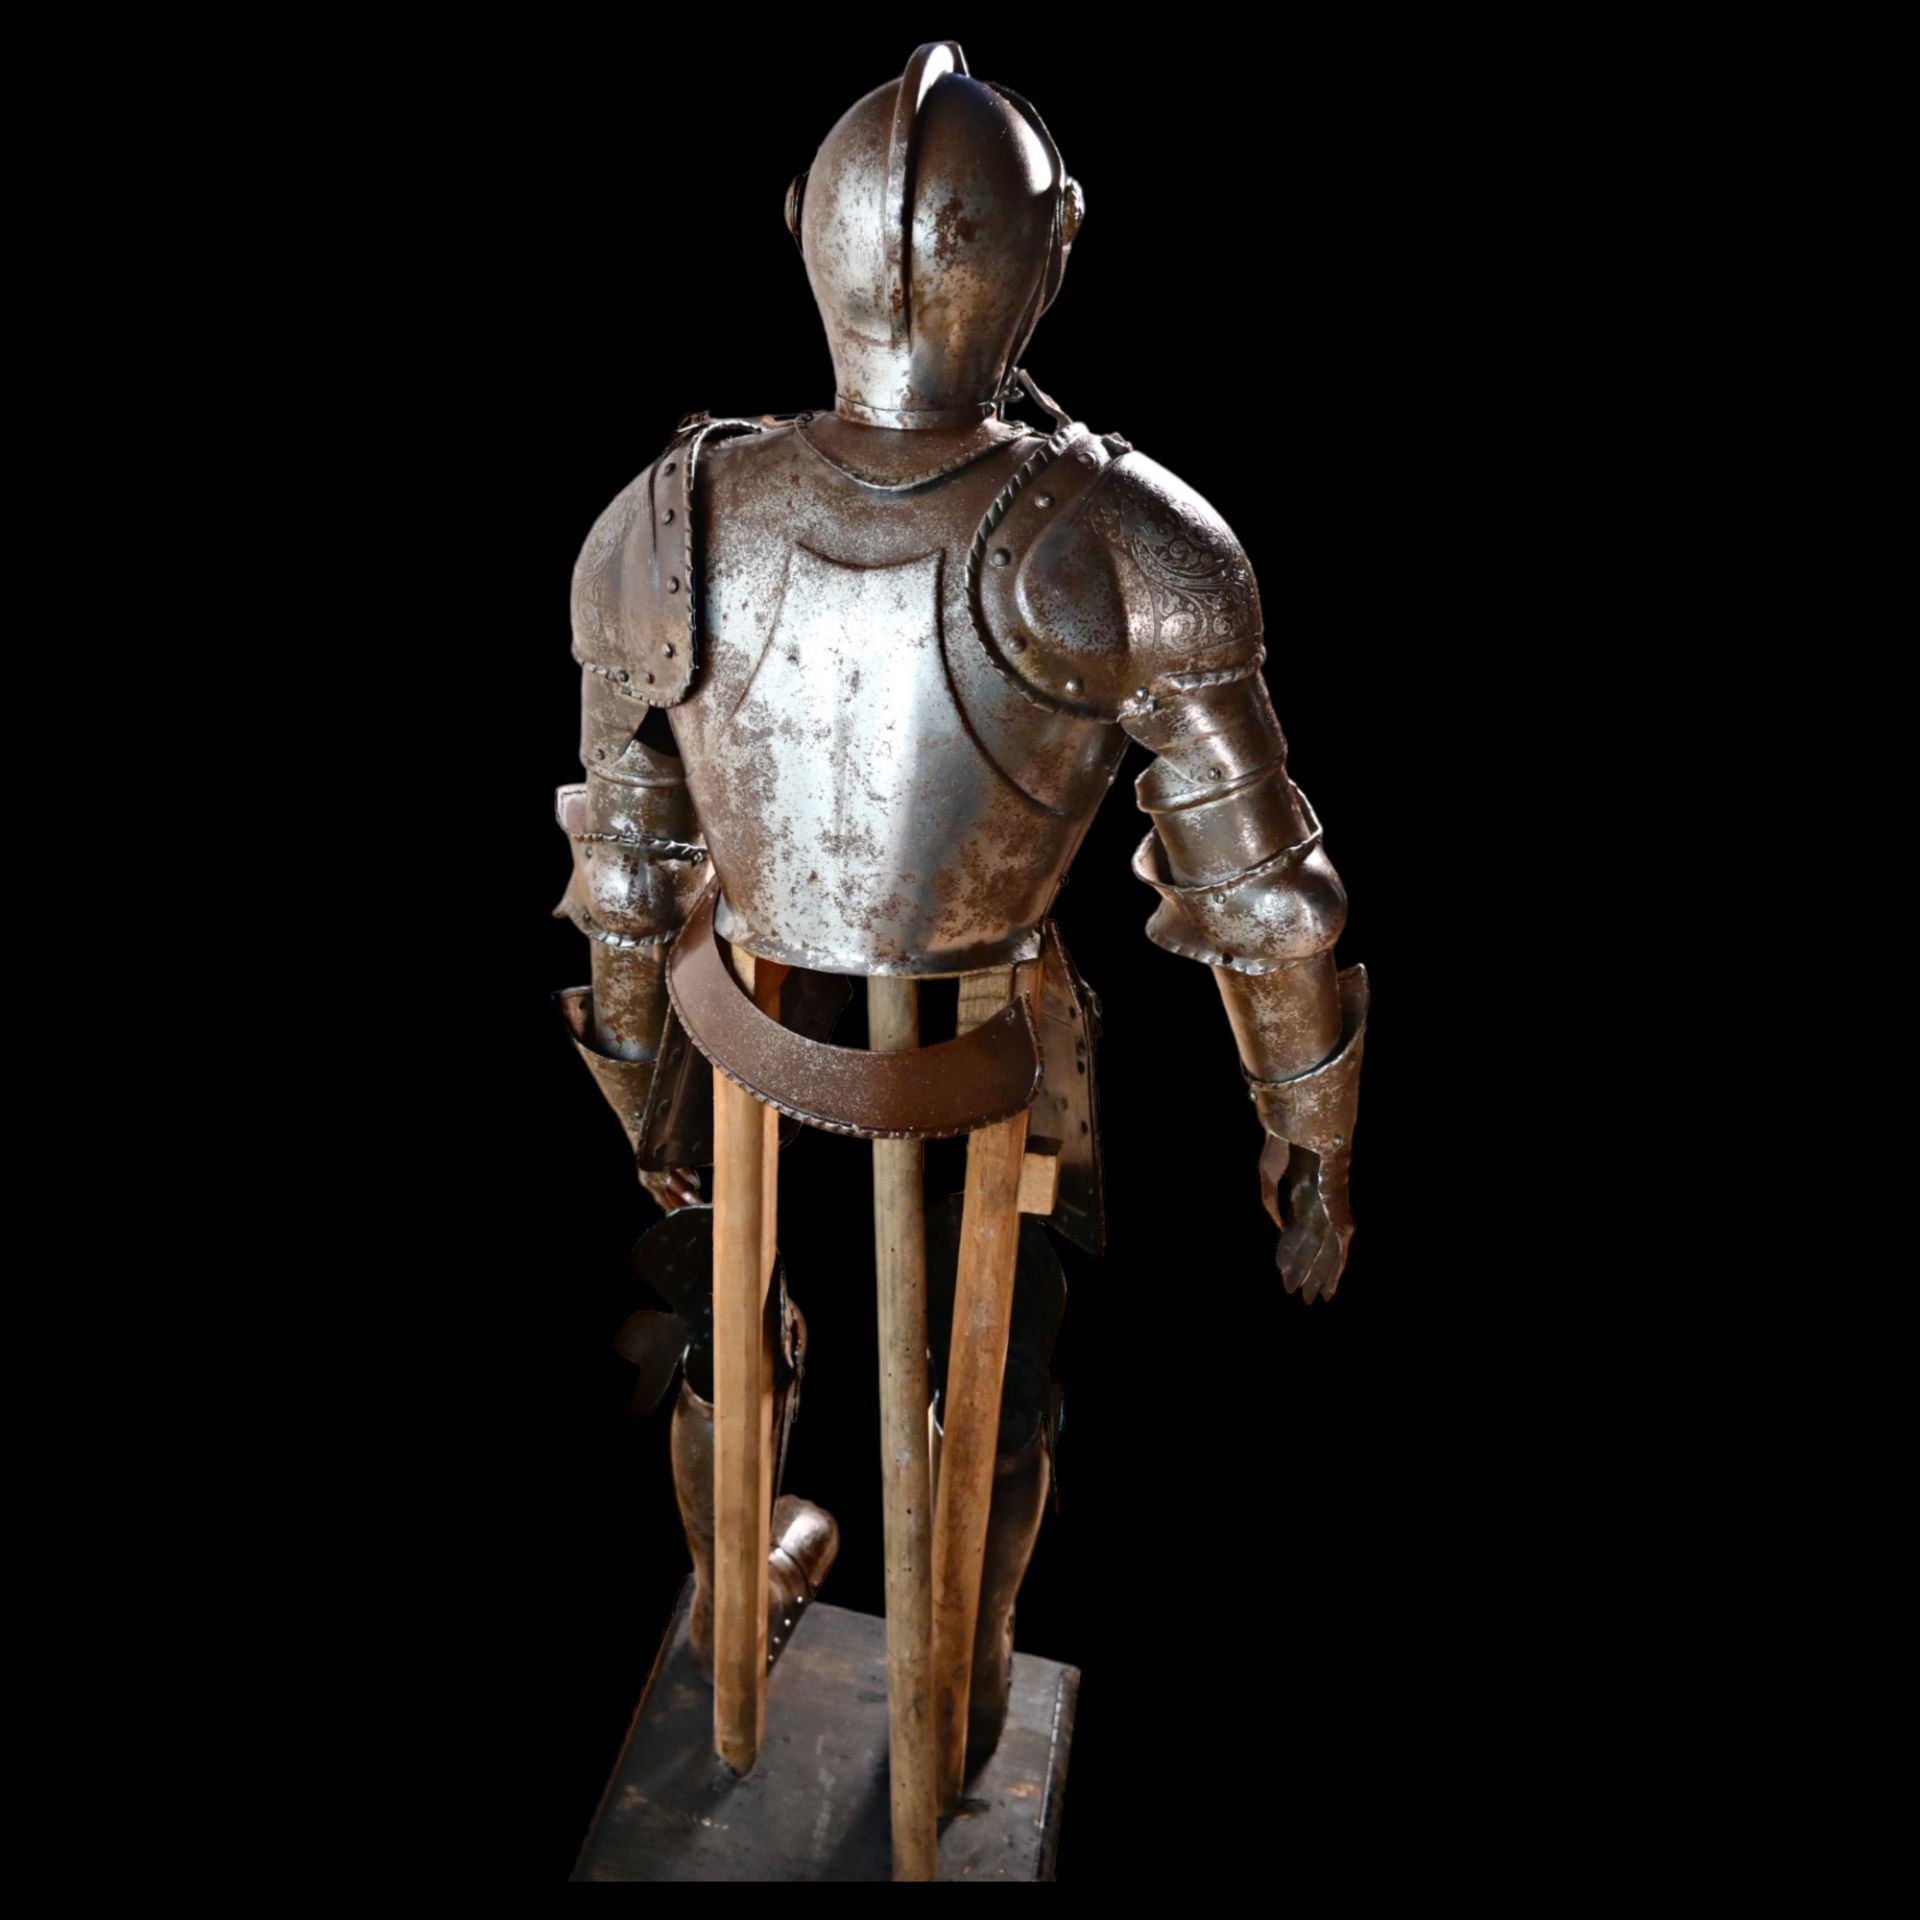 GERMAN MADE VICTORIAN CHILD KNIGHT ARMOR 19th CENTURY - Image 11 of 12